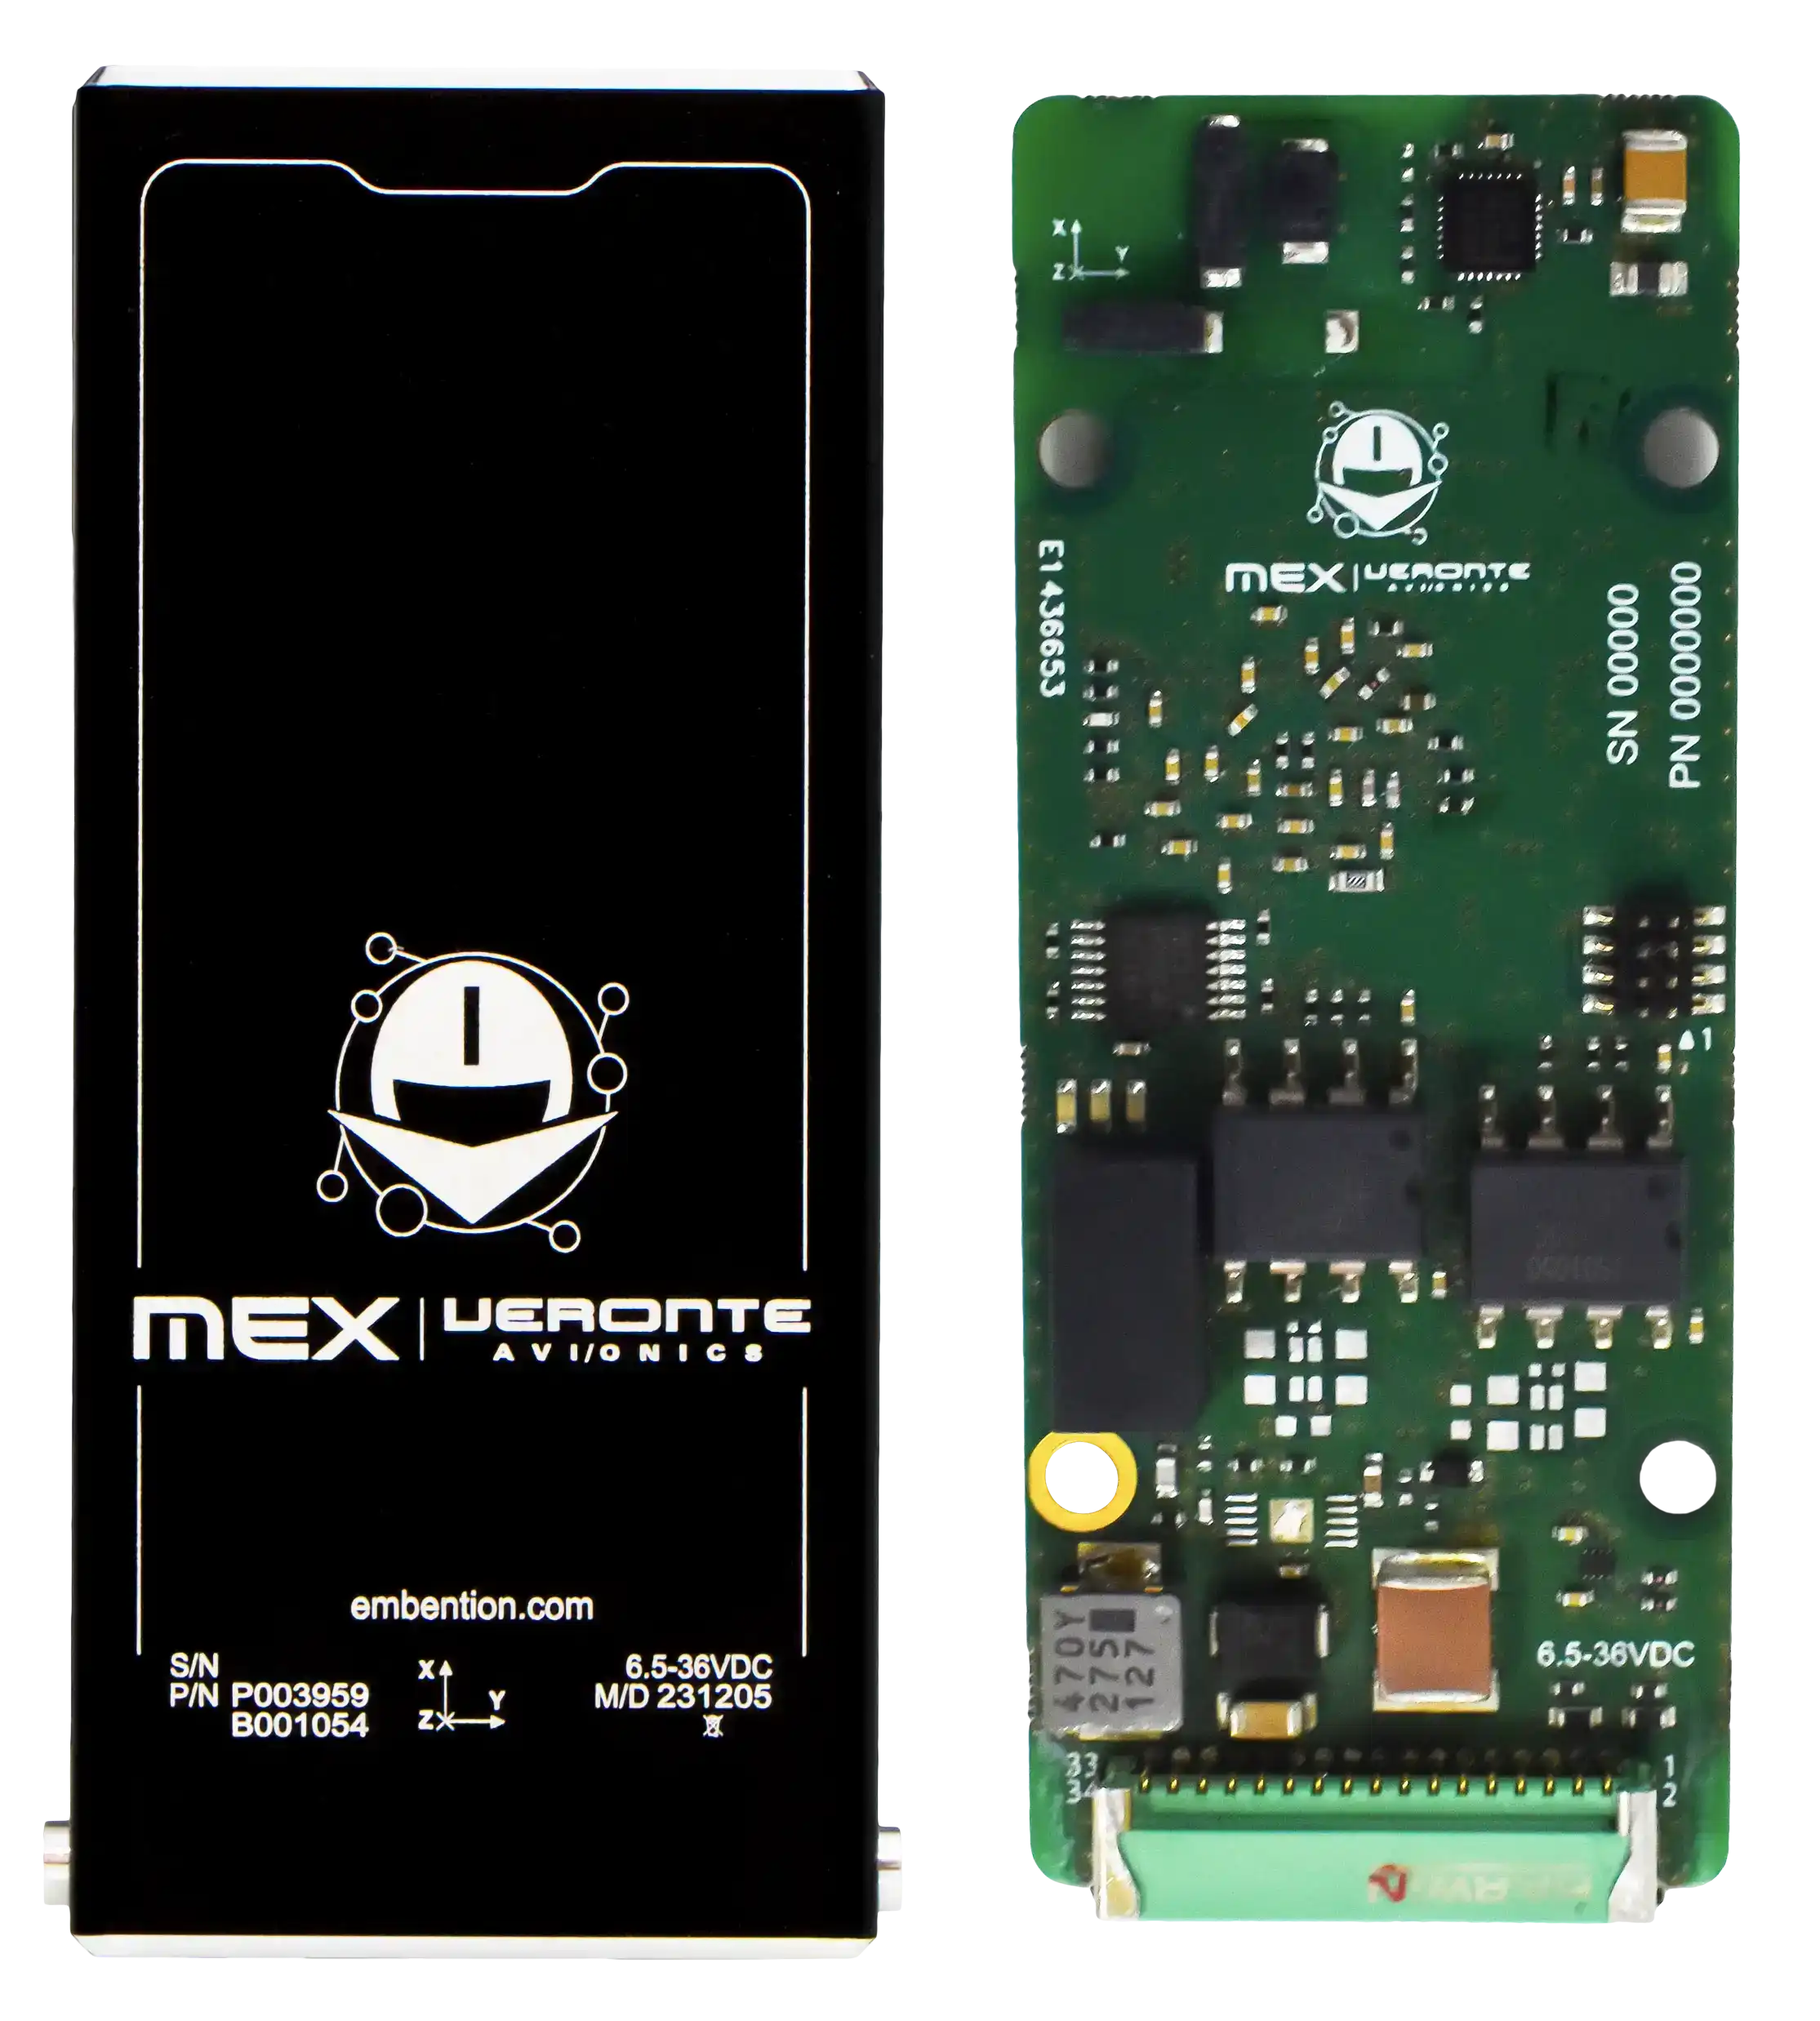 The image displays an "MEX | Veronte Avionics" electronics module by Embention, showing both its labeled exterior and exposed internal circuitry.